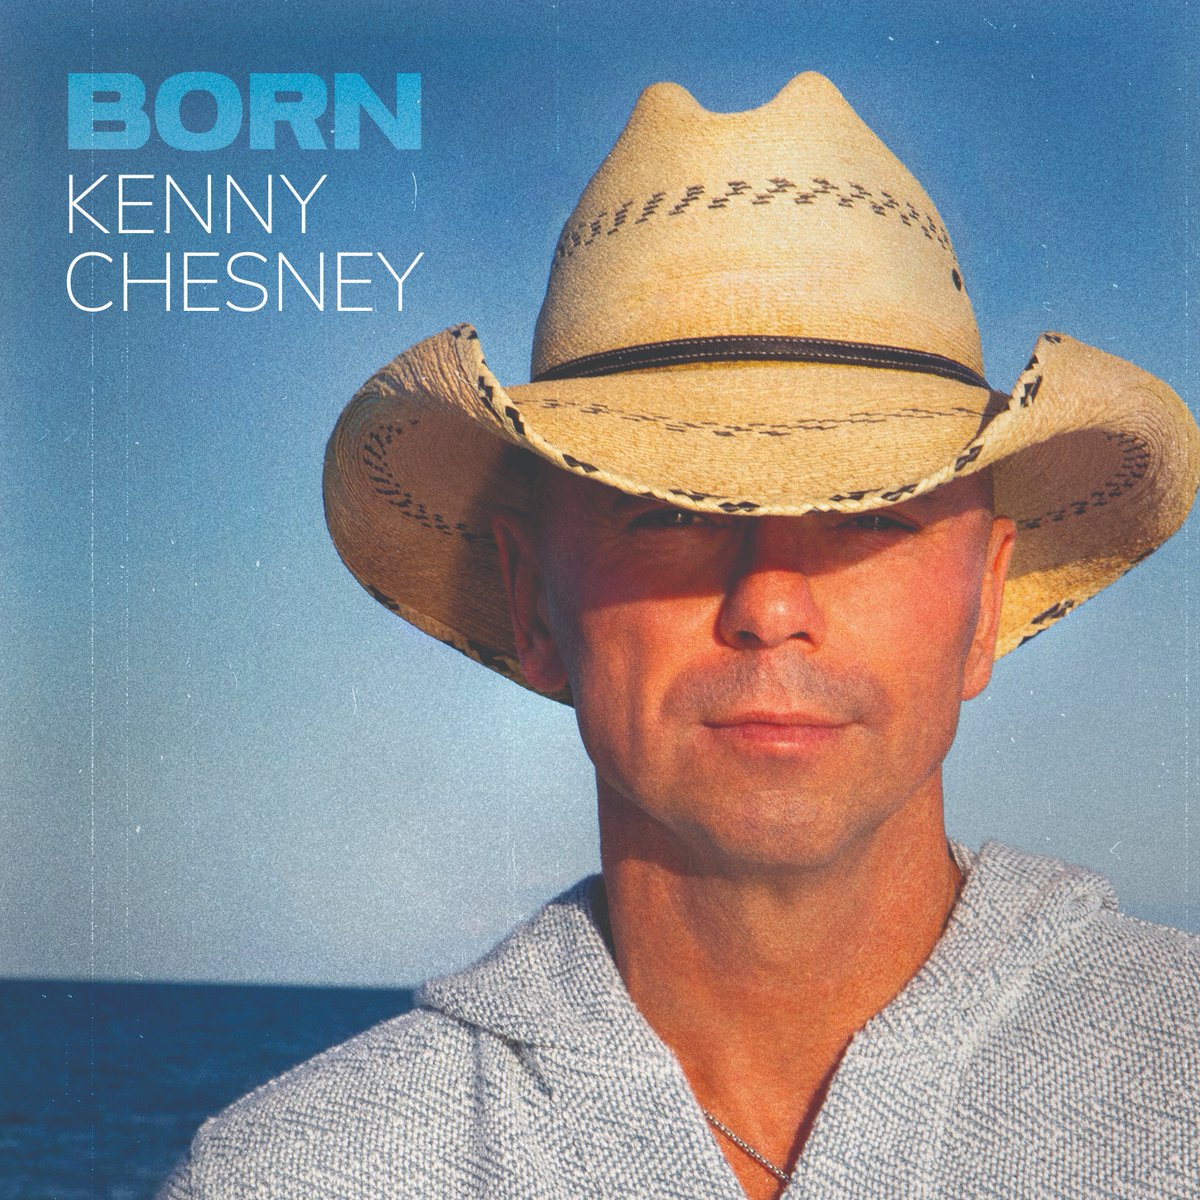 No Shoes Nation... @kennychesney’s new album, BORN, is out everywhere now 🎶 Jam out and get ready for the Sun Goes Down Tour, coming to GEHA Field at Arrowhead Stadium on July 6! Tickets on sale now 🎟: chfs.me/KCSGDT